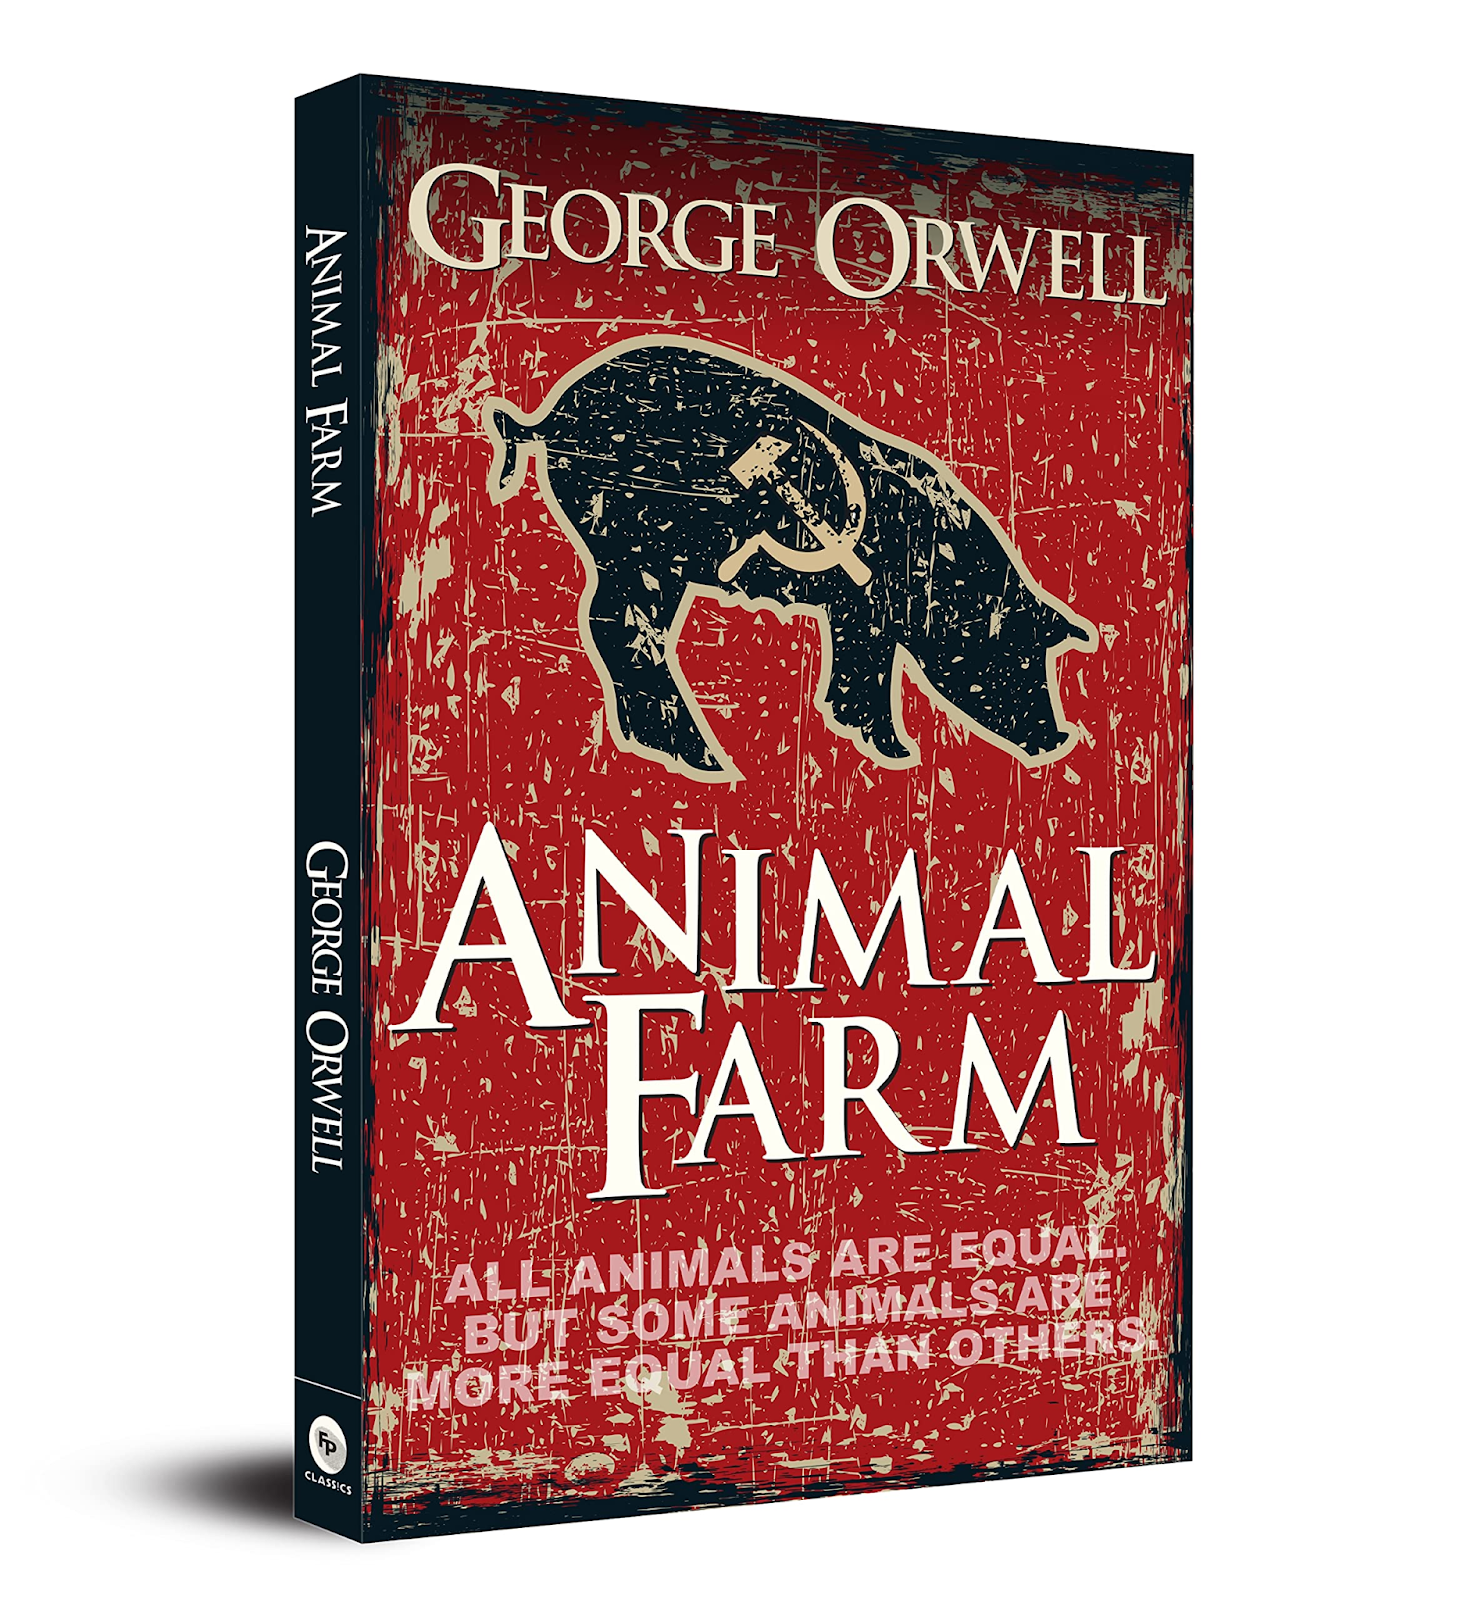 Book Review: 'Animal Farm' by 'George Orwell' – 'A Corrupted Revolution'